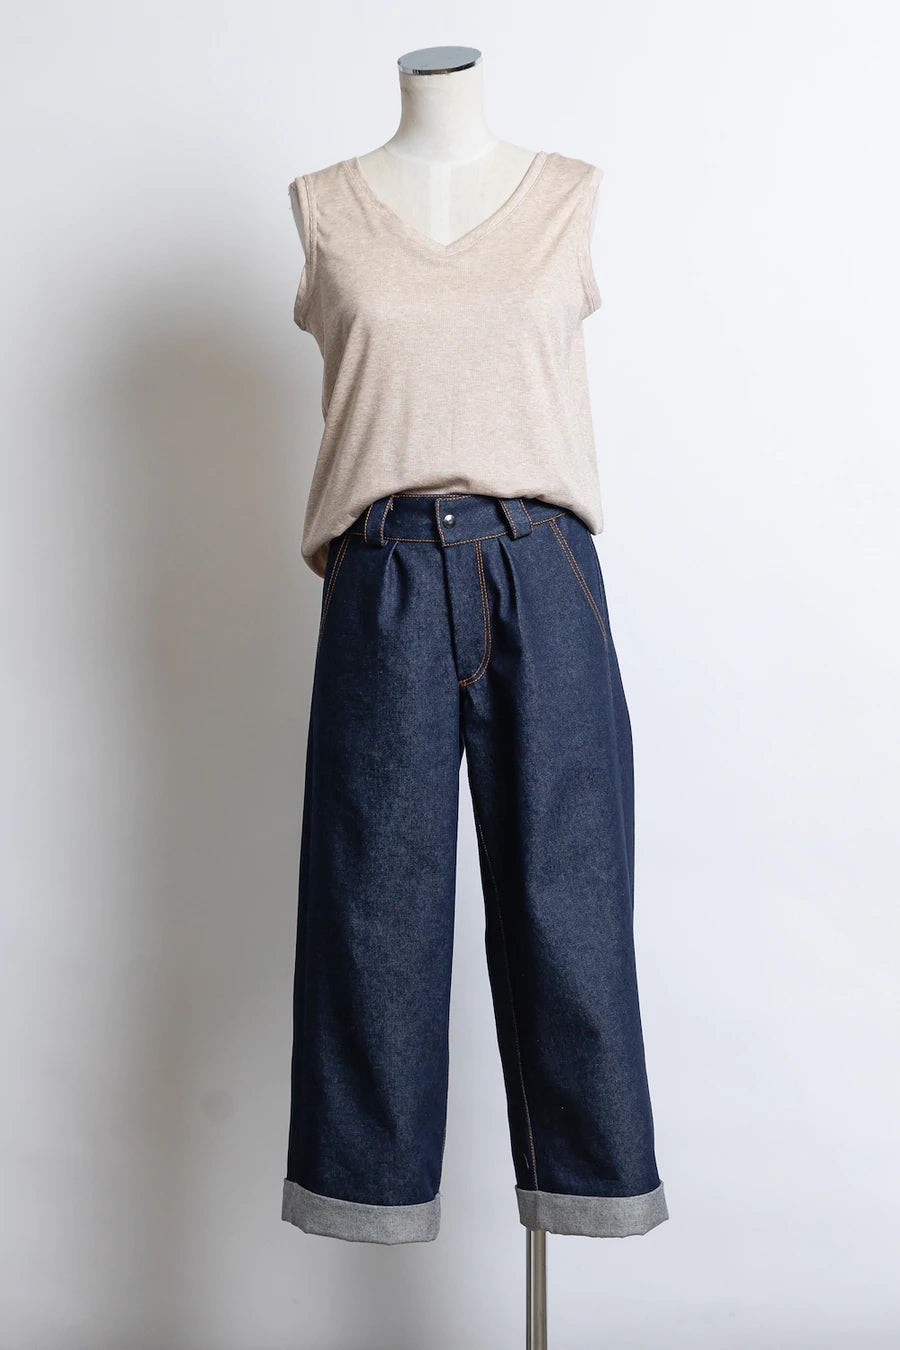 7/8th Length Boxer Jeans